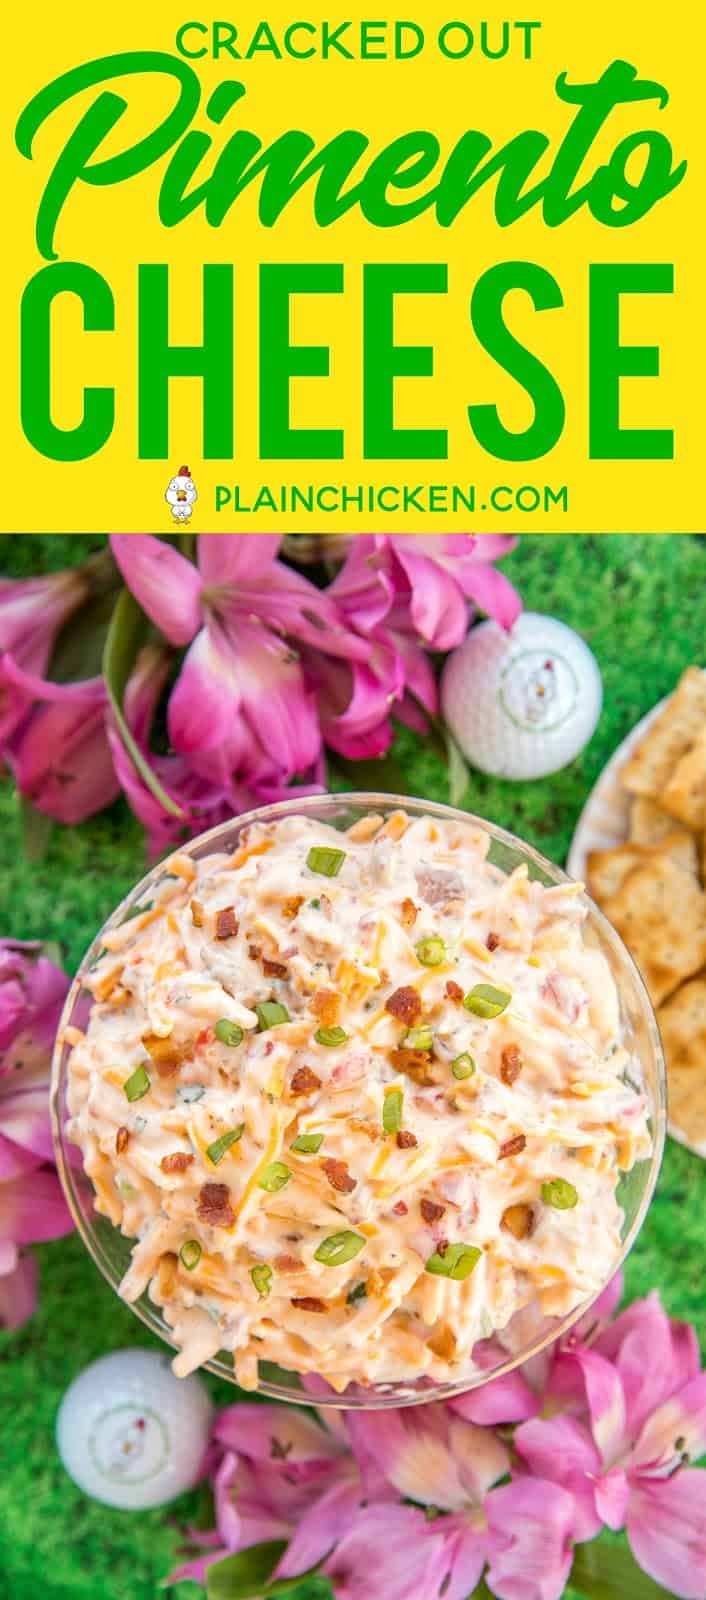 Cracked Out Pimento Cheese - pimento cheese loaded with cheddar, bacon and ranch! Dangerously delicious!! Great as a dip or on a sandwich. Cheddar cheese, pimentos, mayonnaise, ranch dressing mix, bacon, green onions. So simple and it tastes AMAZING! Perfect for watching The Masters golf tournament! #crack #pimentocheese #cheese #themasters #dip